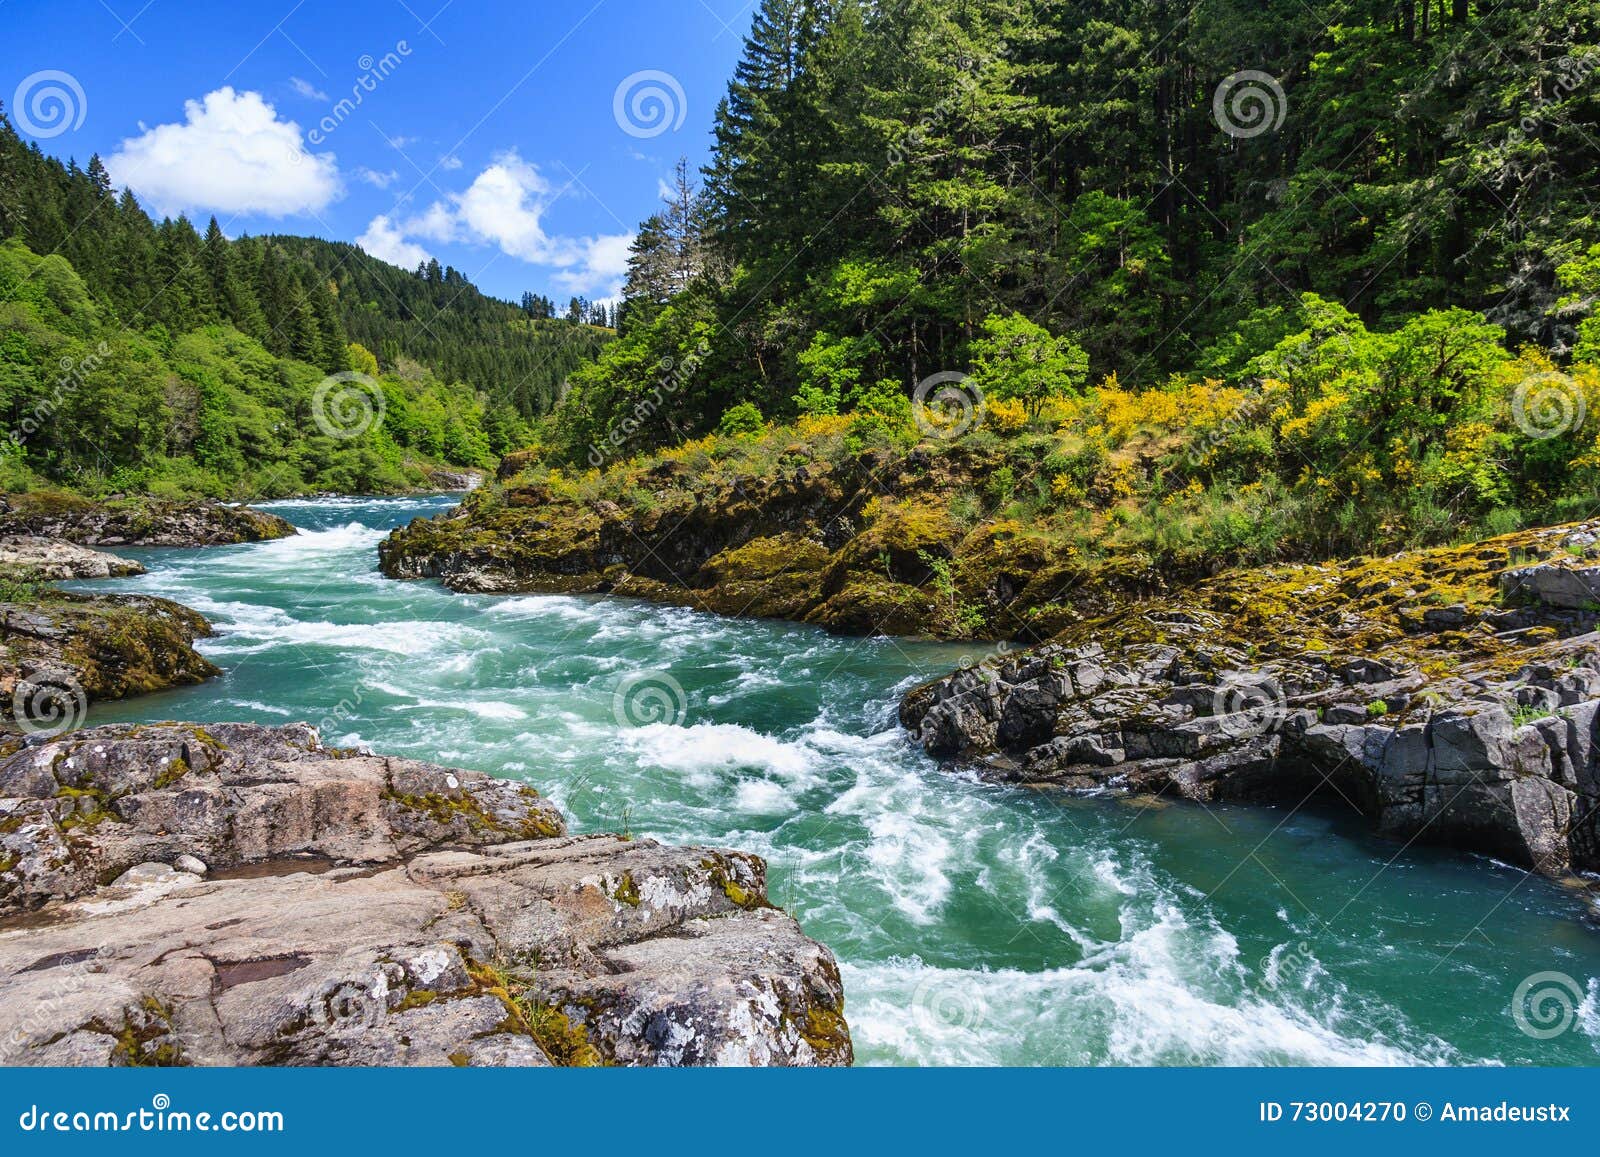 mountain river and forest in north cascades national park washington usa